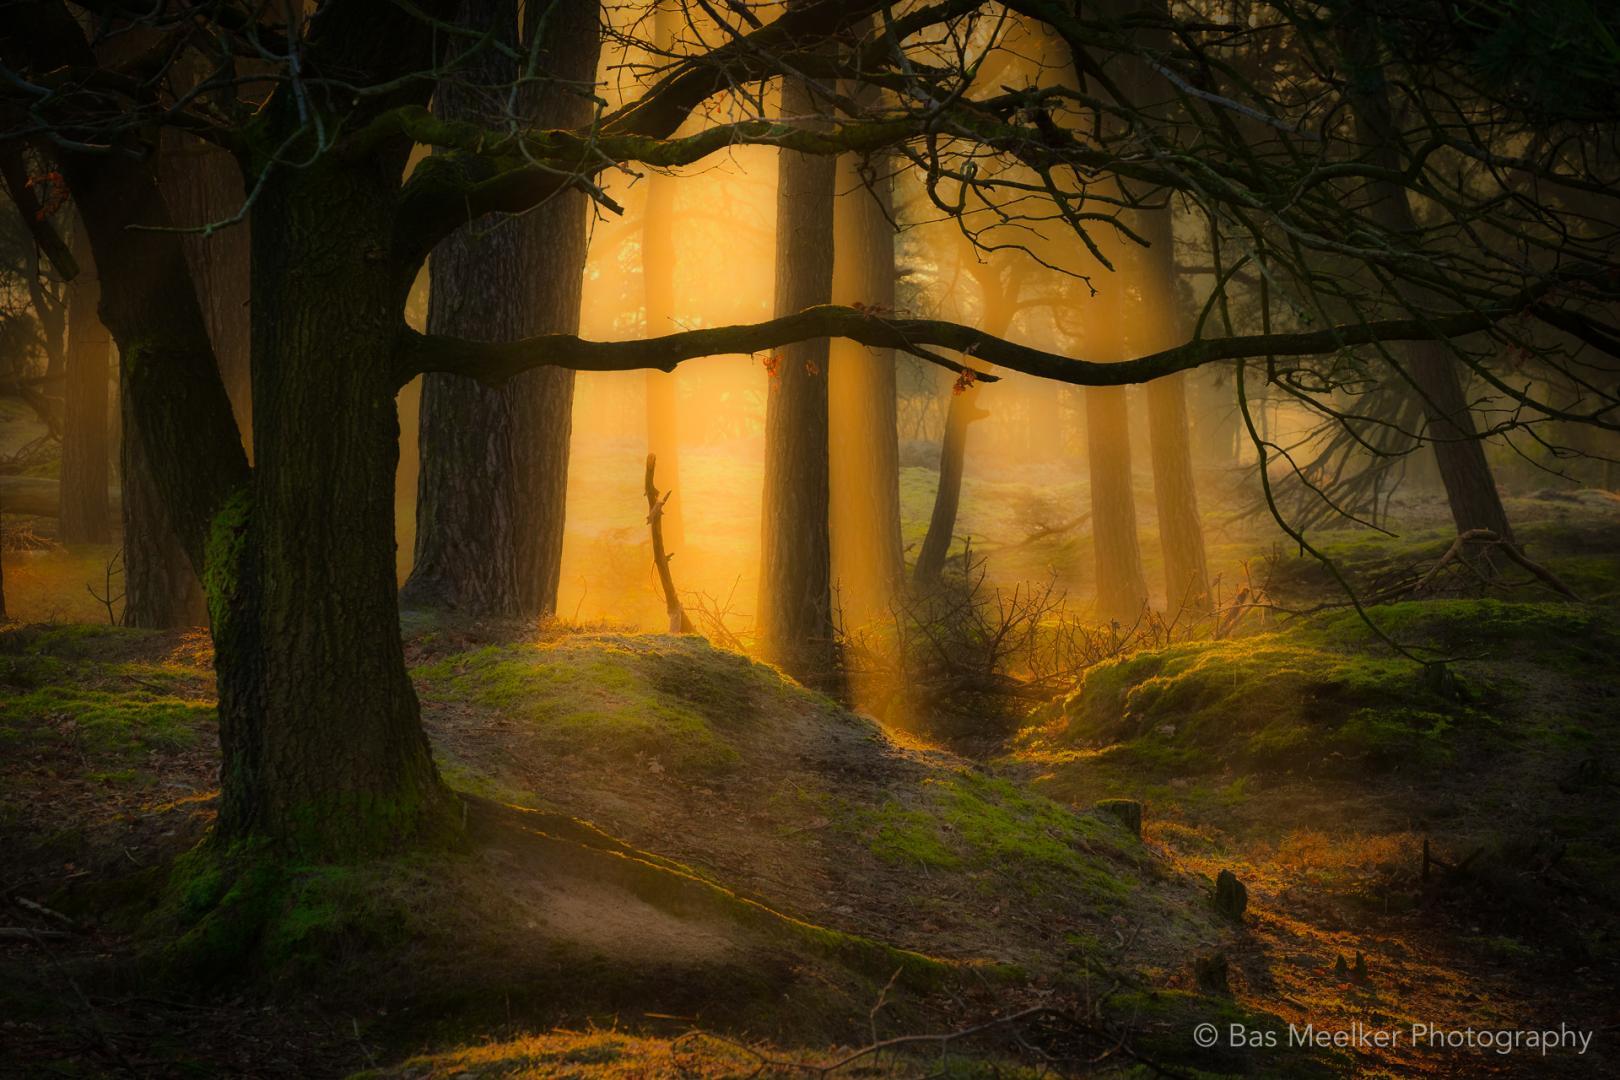 Forest dreams - Gasterse duinen, The Netherlands